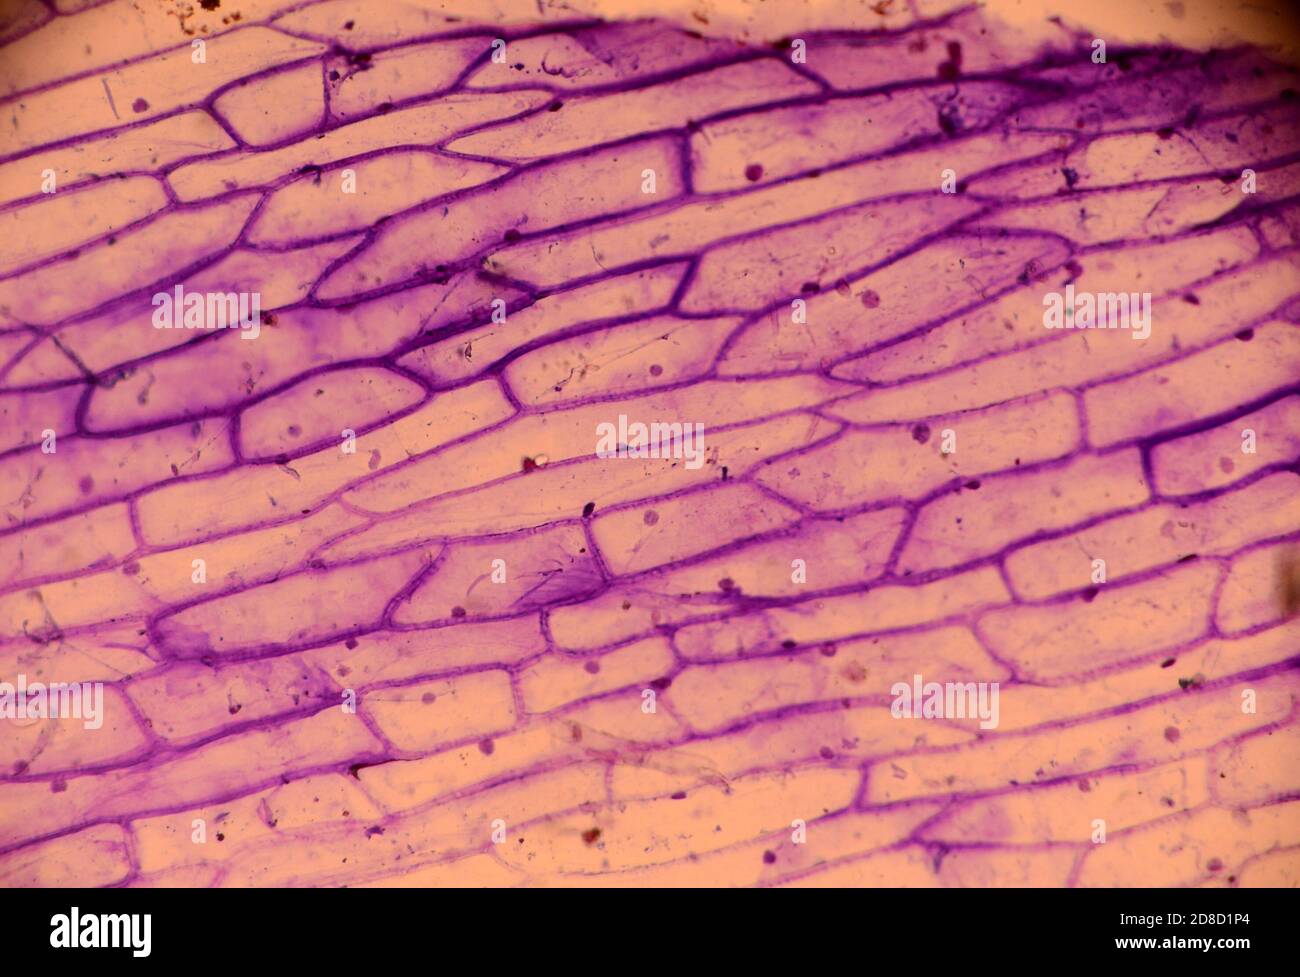 Microscopy of onion skin colored with methylene violet. The cell walls and cell nucleus can be seen. Stock Photo